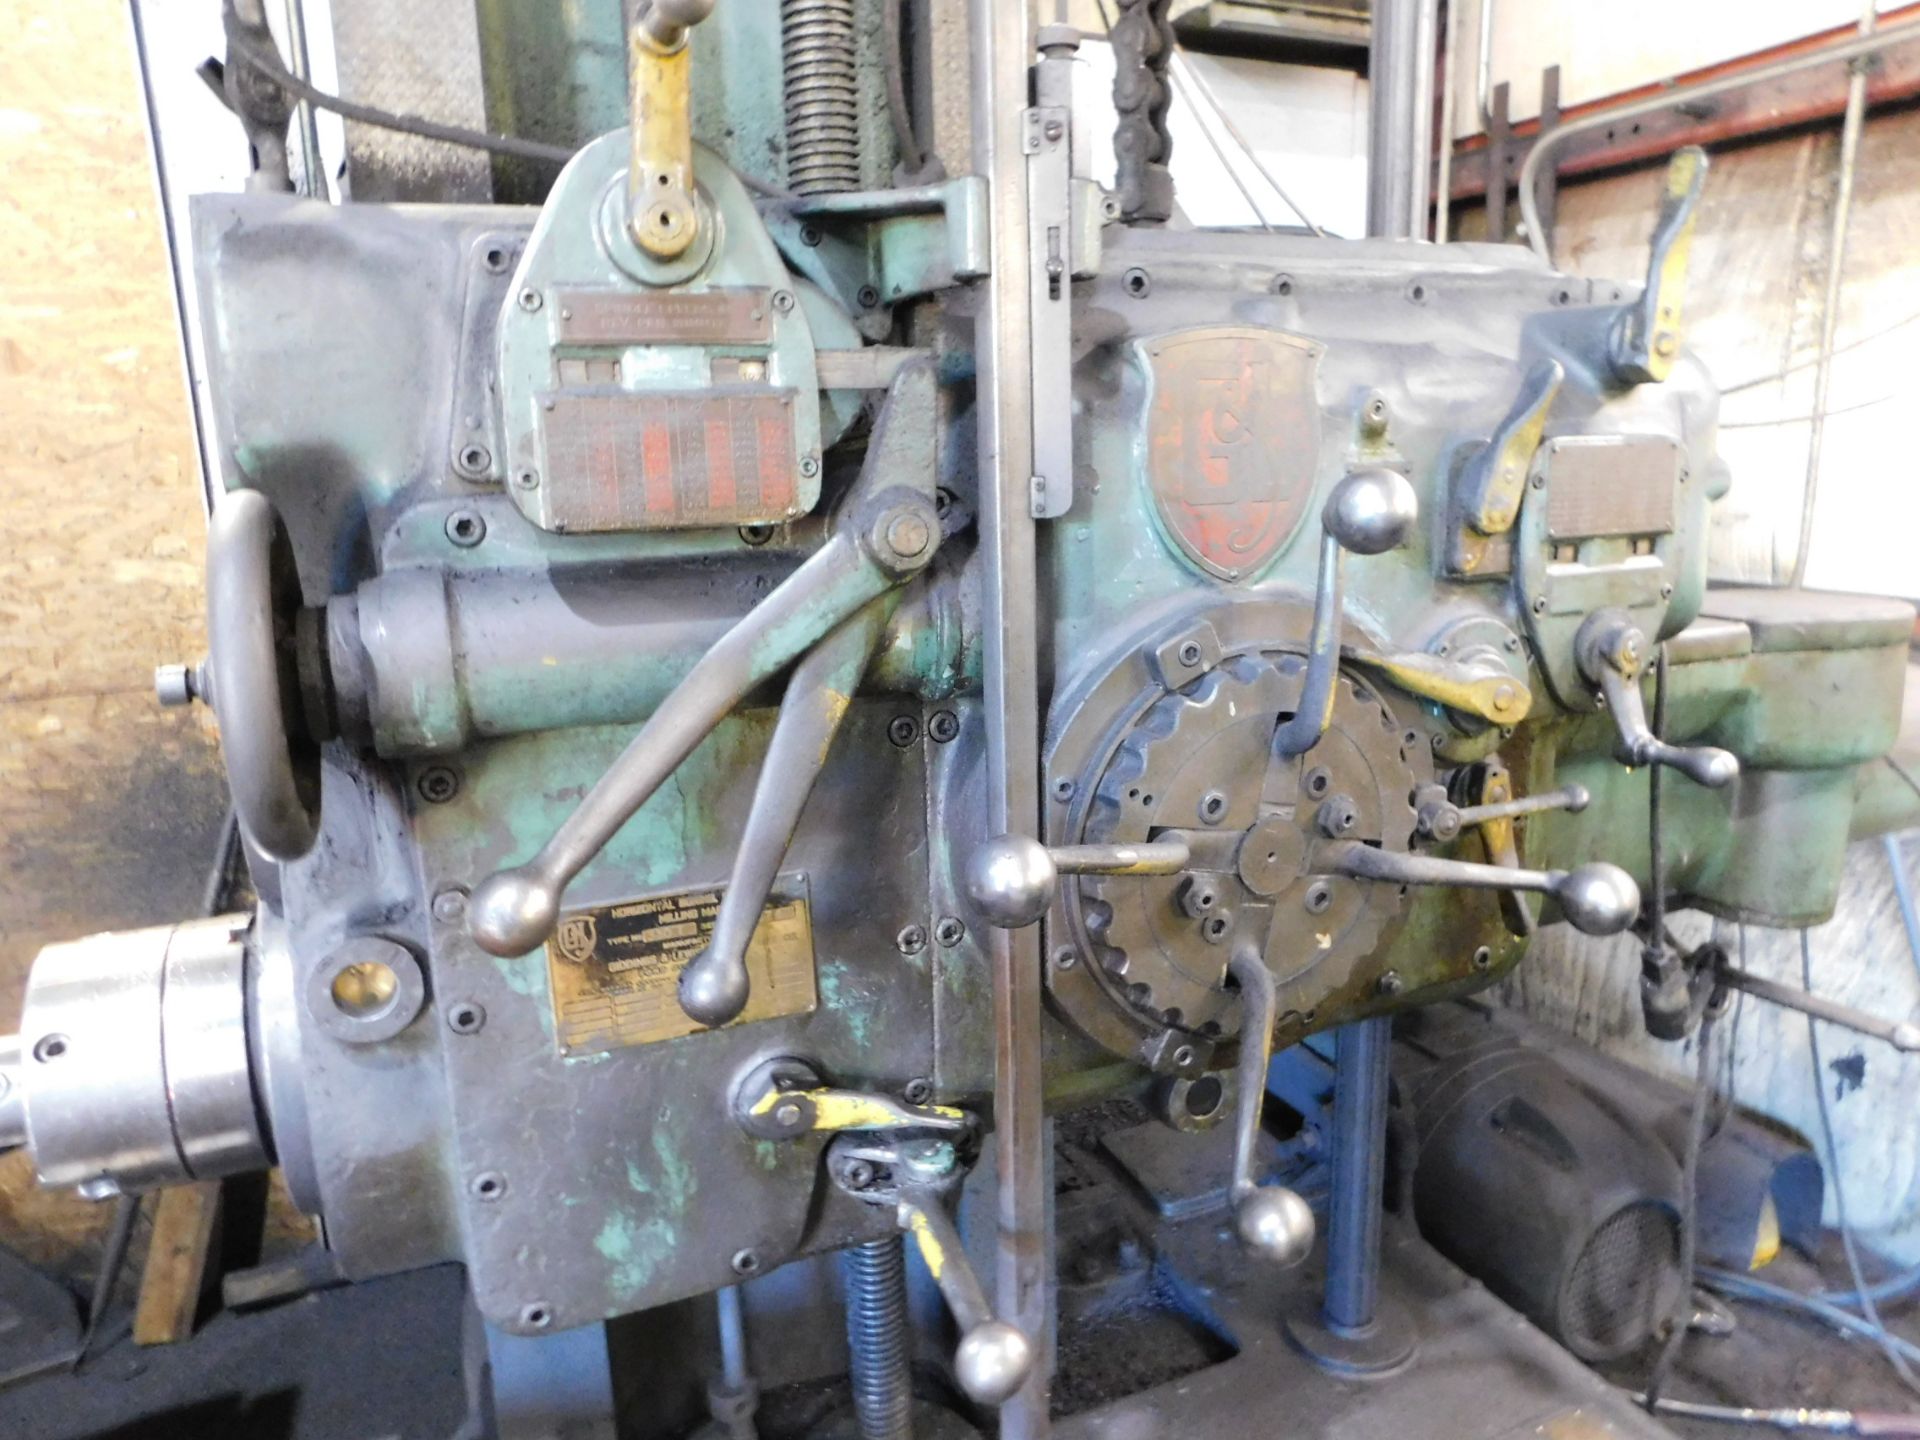 Giddings and Lewis Model 330T Table Type Horizontal Boring Mill, s/n 7024, 3 In. Spindle, 30 In. X - Image 7 of 12